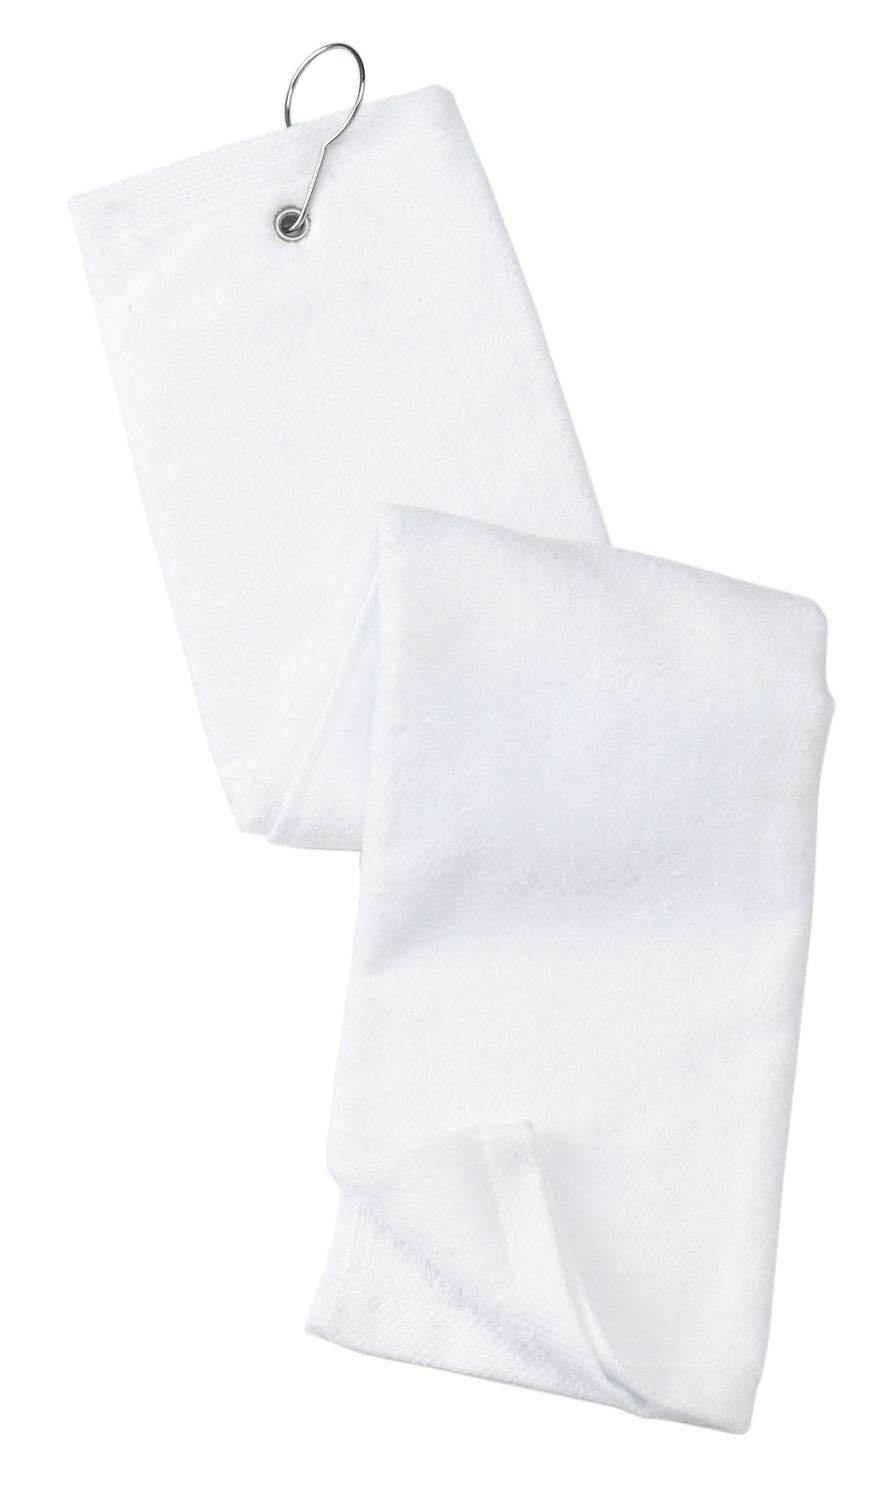 Port Authority Grommeted Tri-Fold Golf Towel. TW50